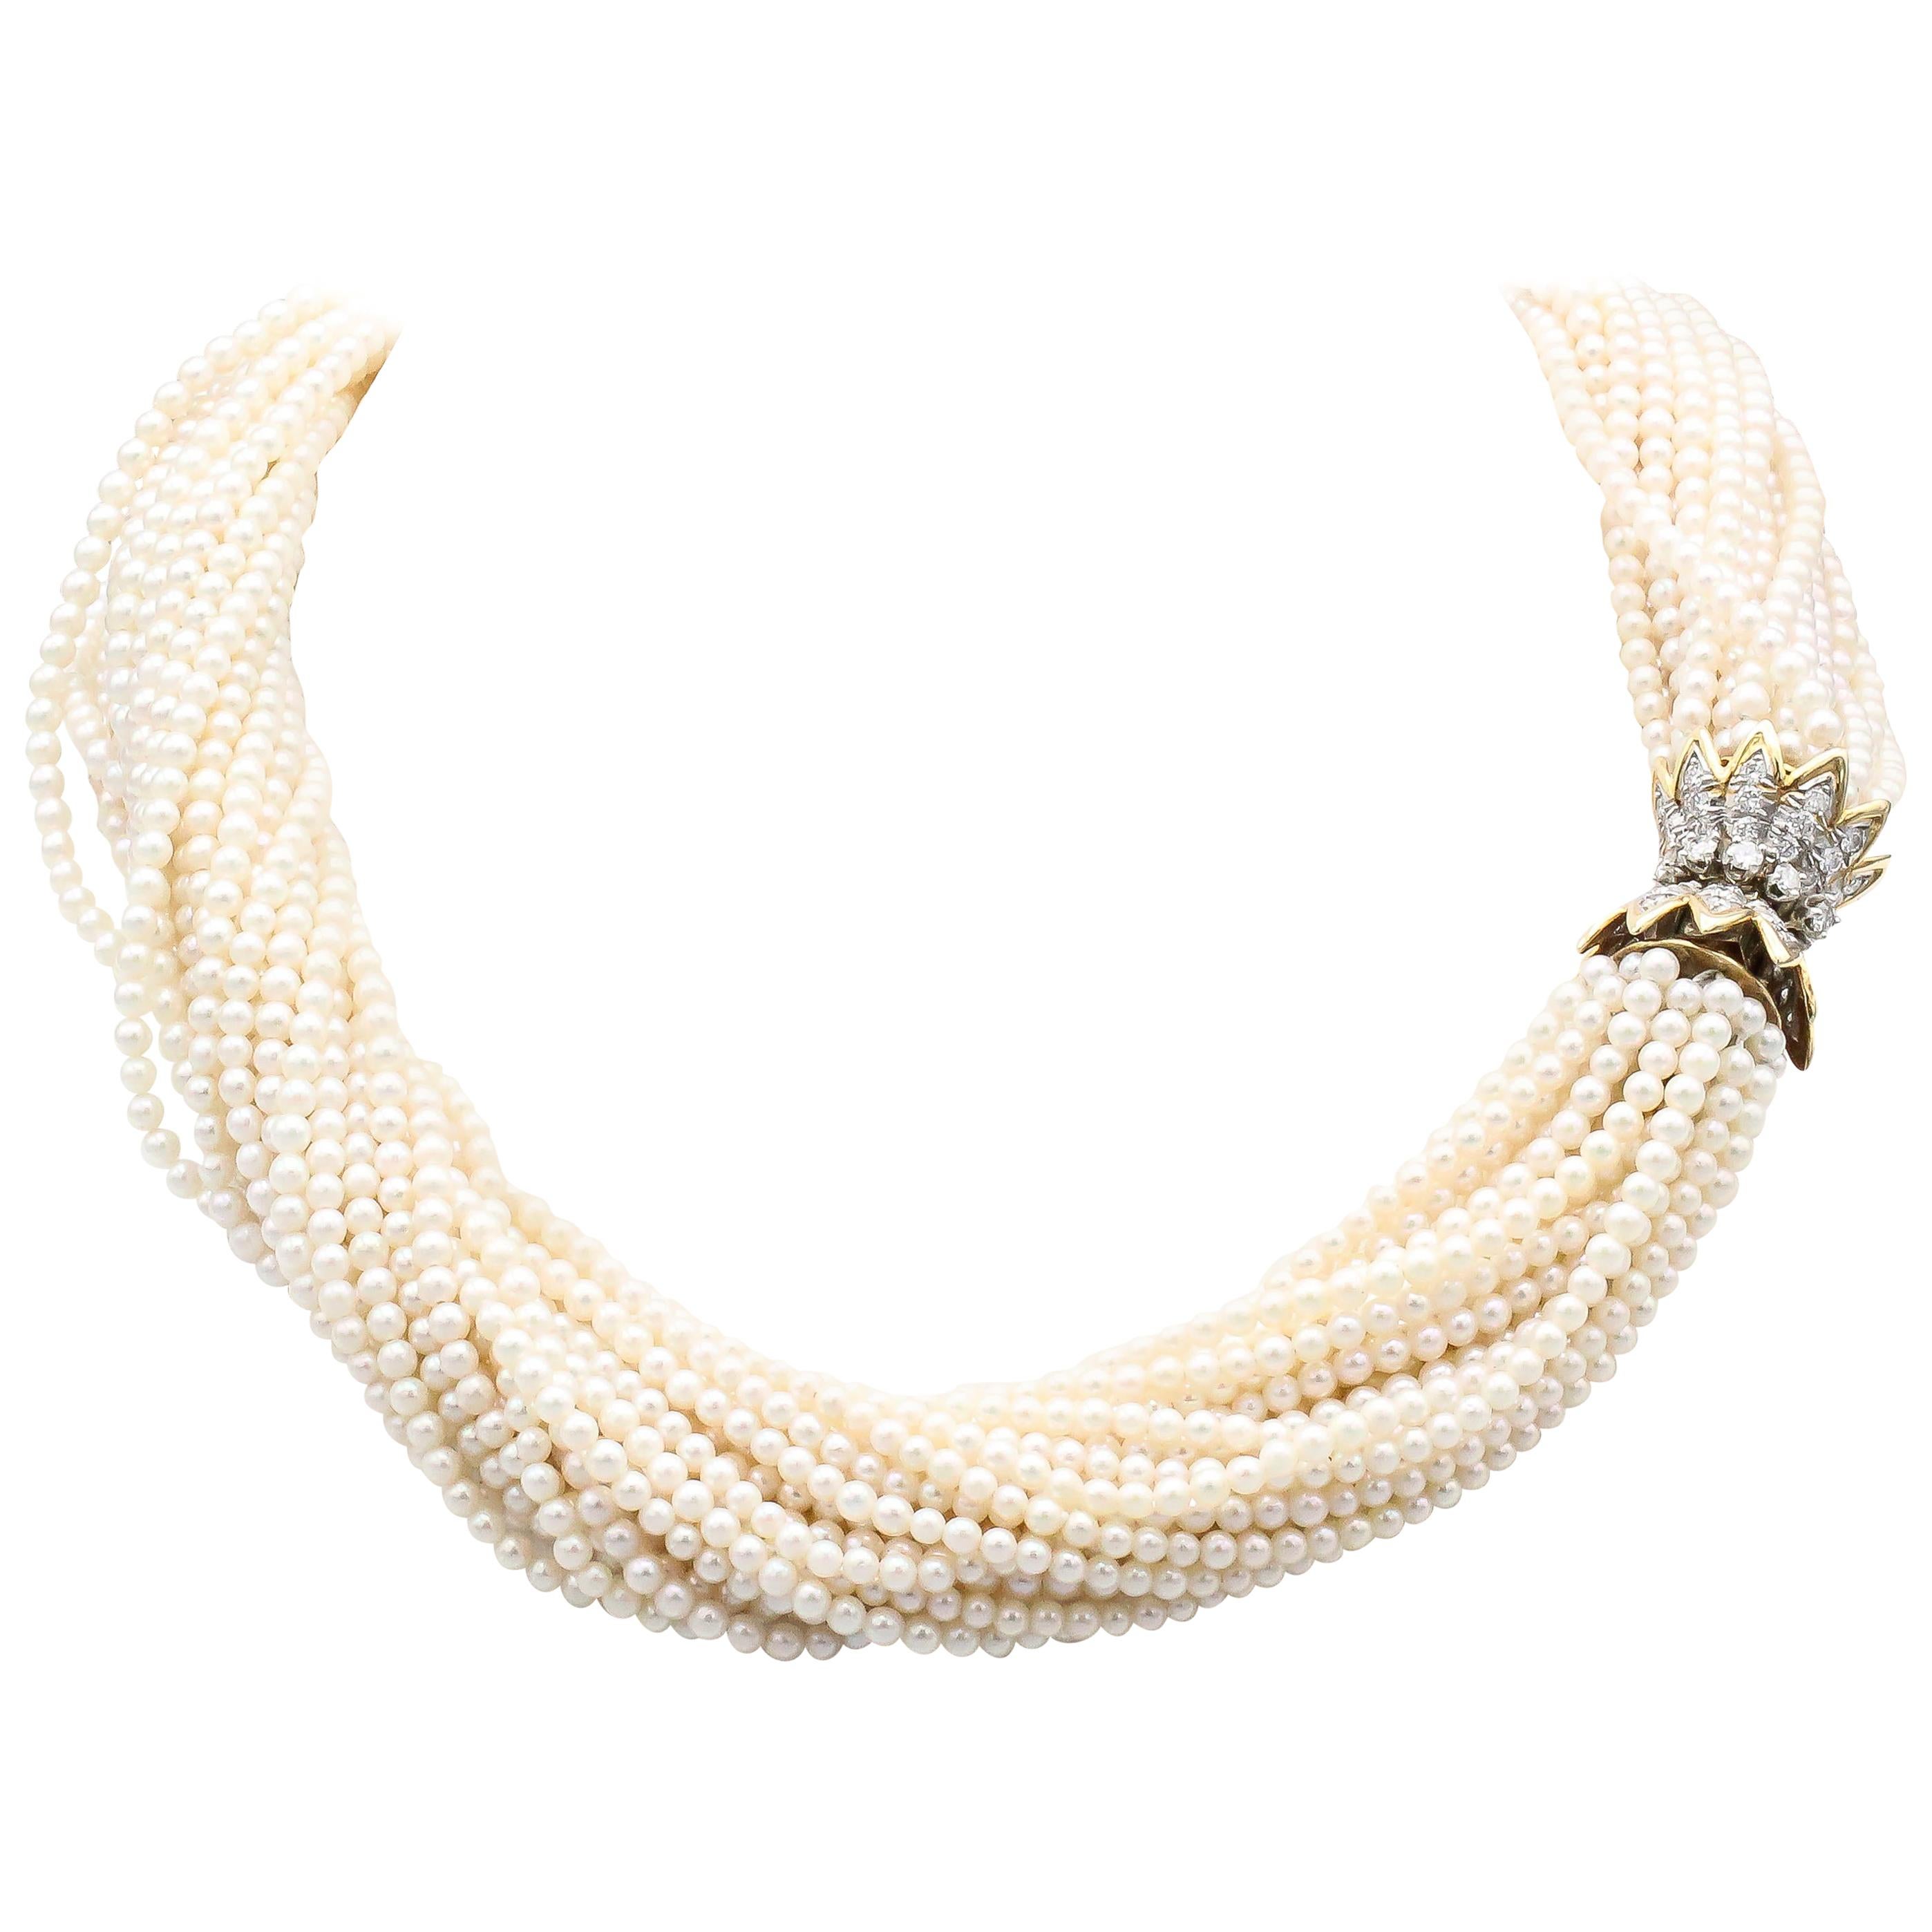 Tiffany & Co. Schlumberger Pearl Diamond and Gold Torsade Necklace